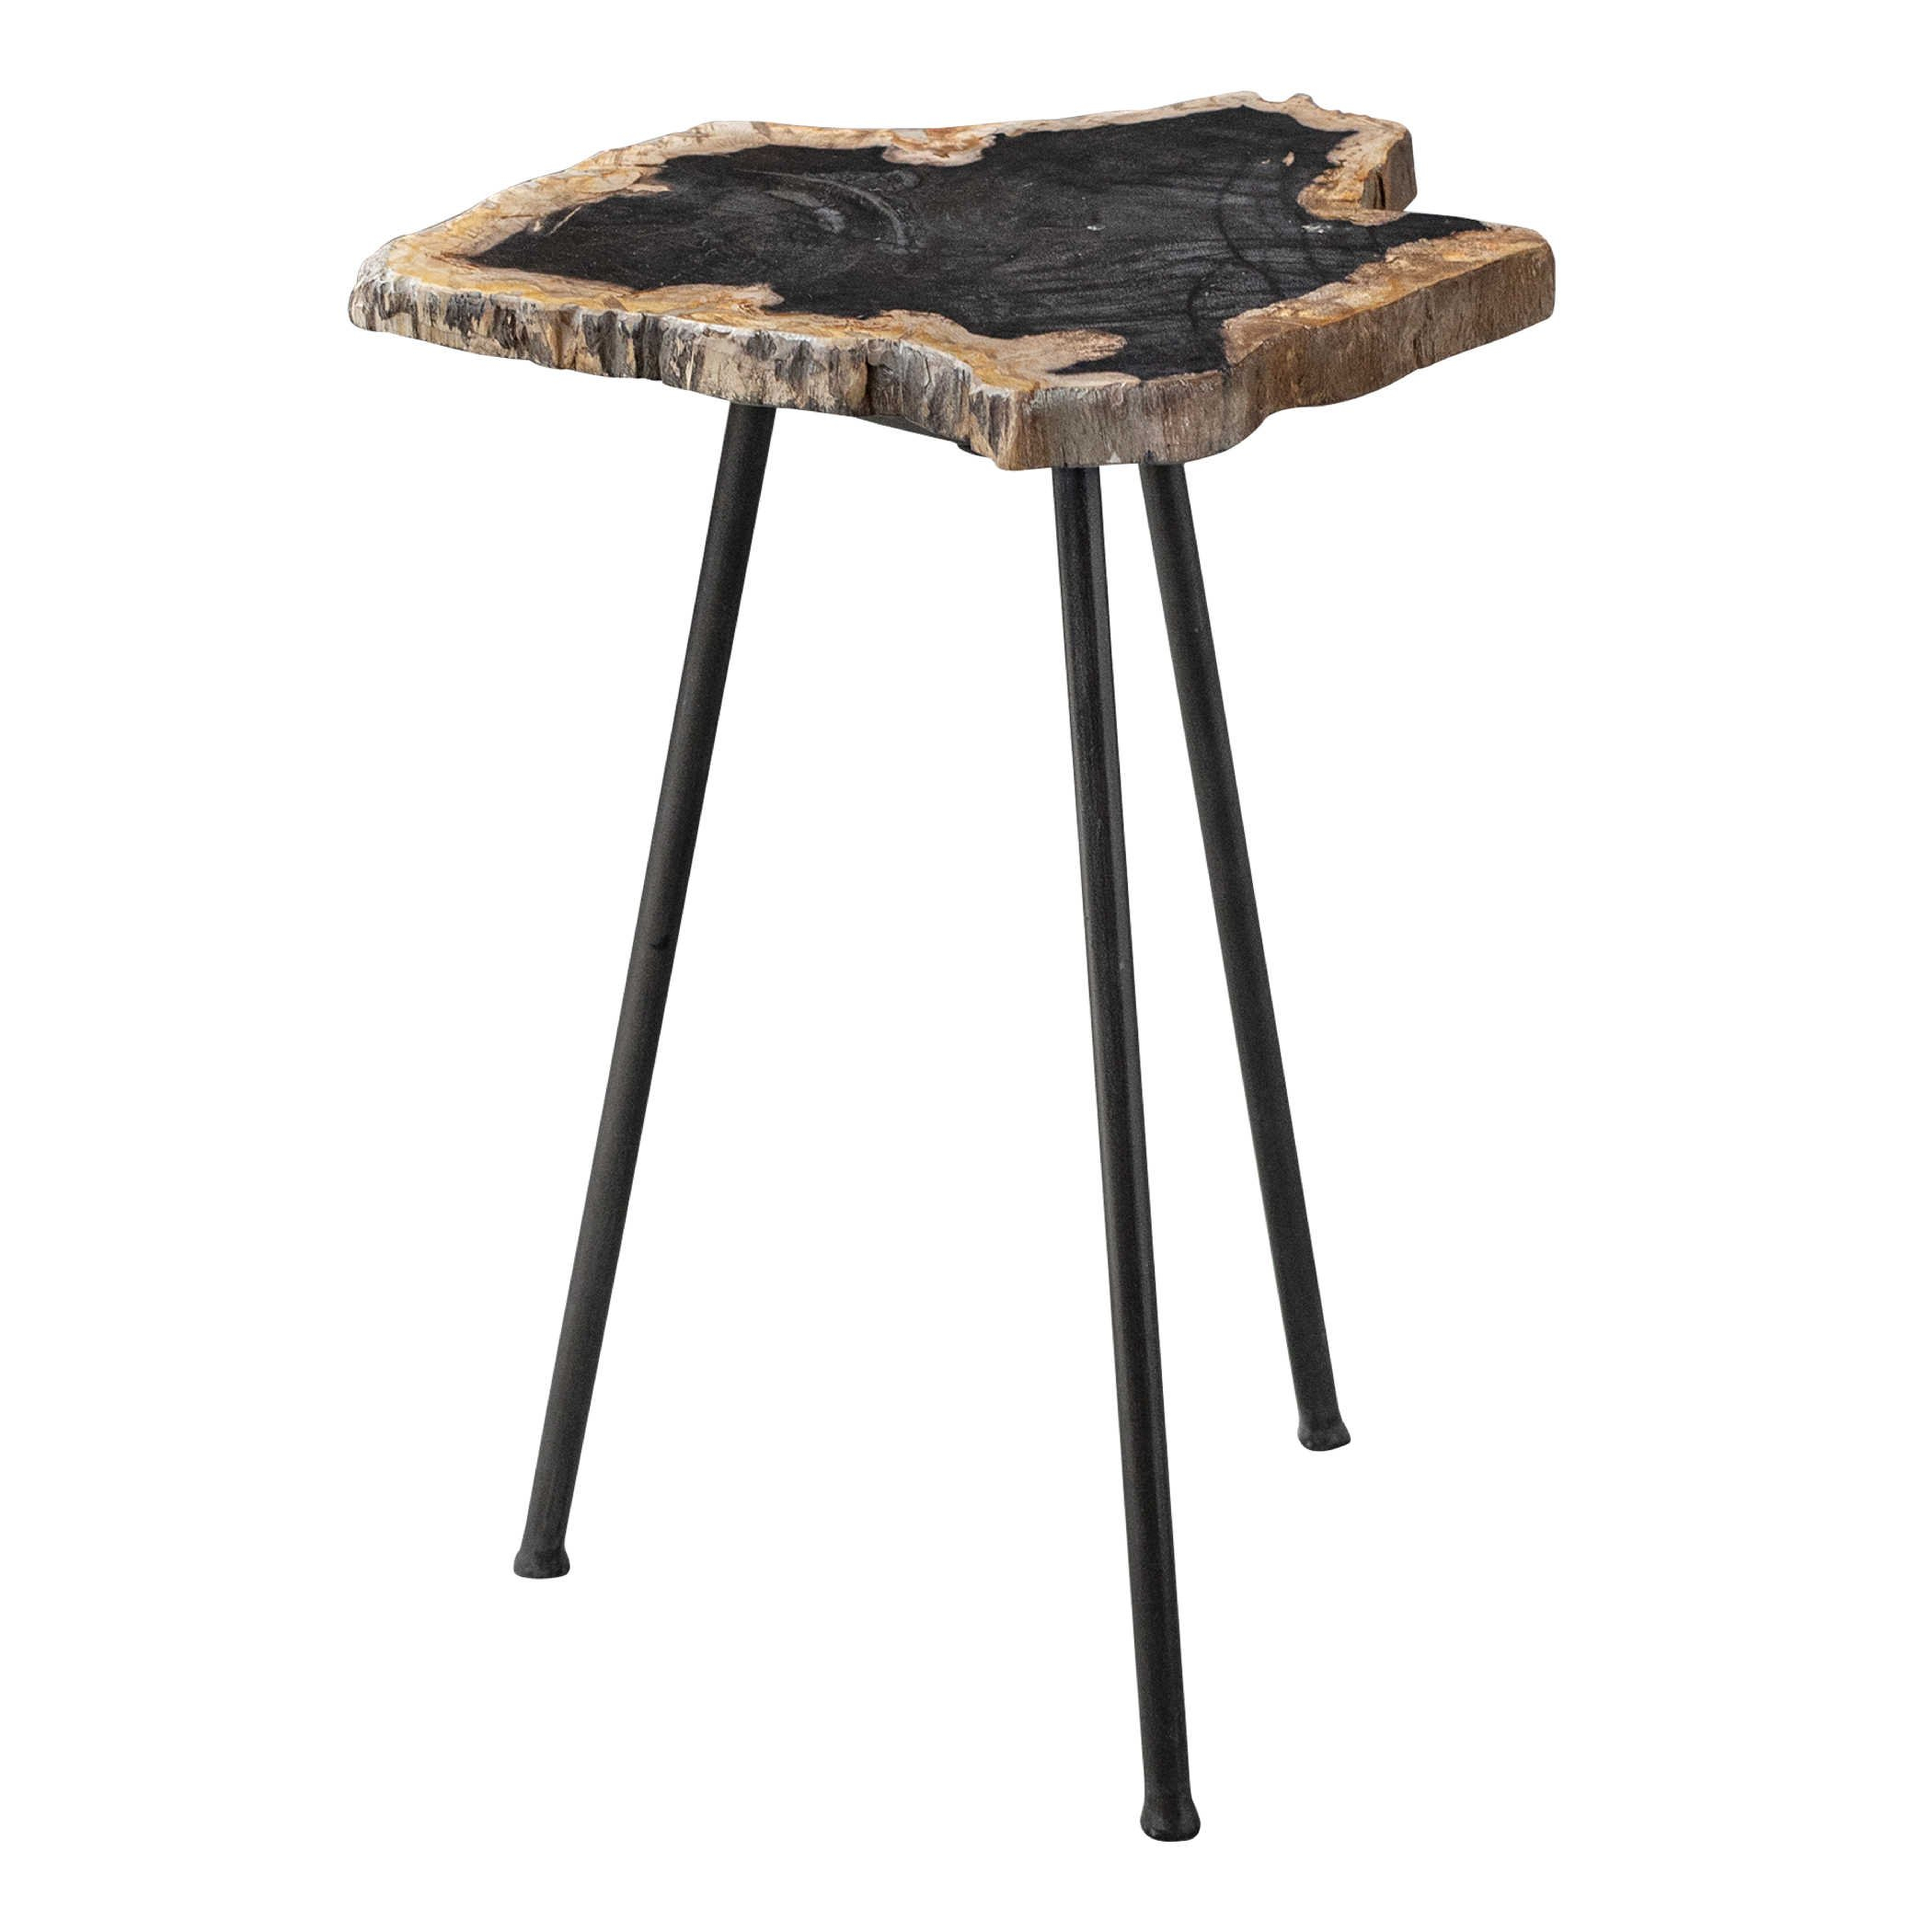 Mircea Petrified Wood Accent Table - Hudsonhill Foundry